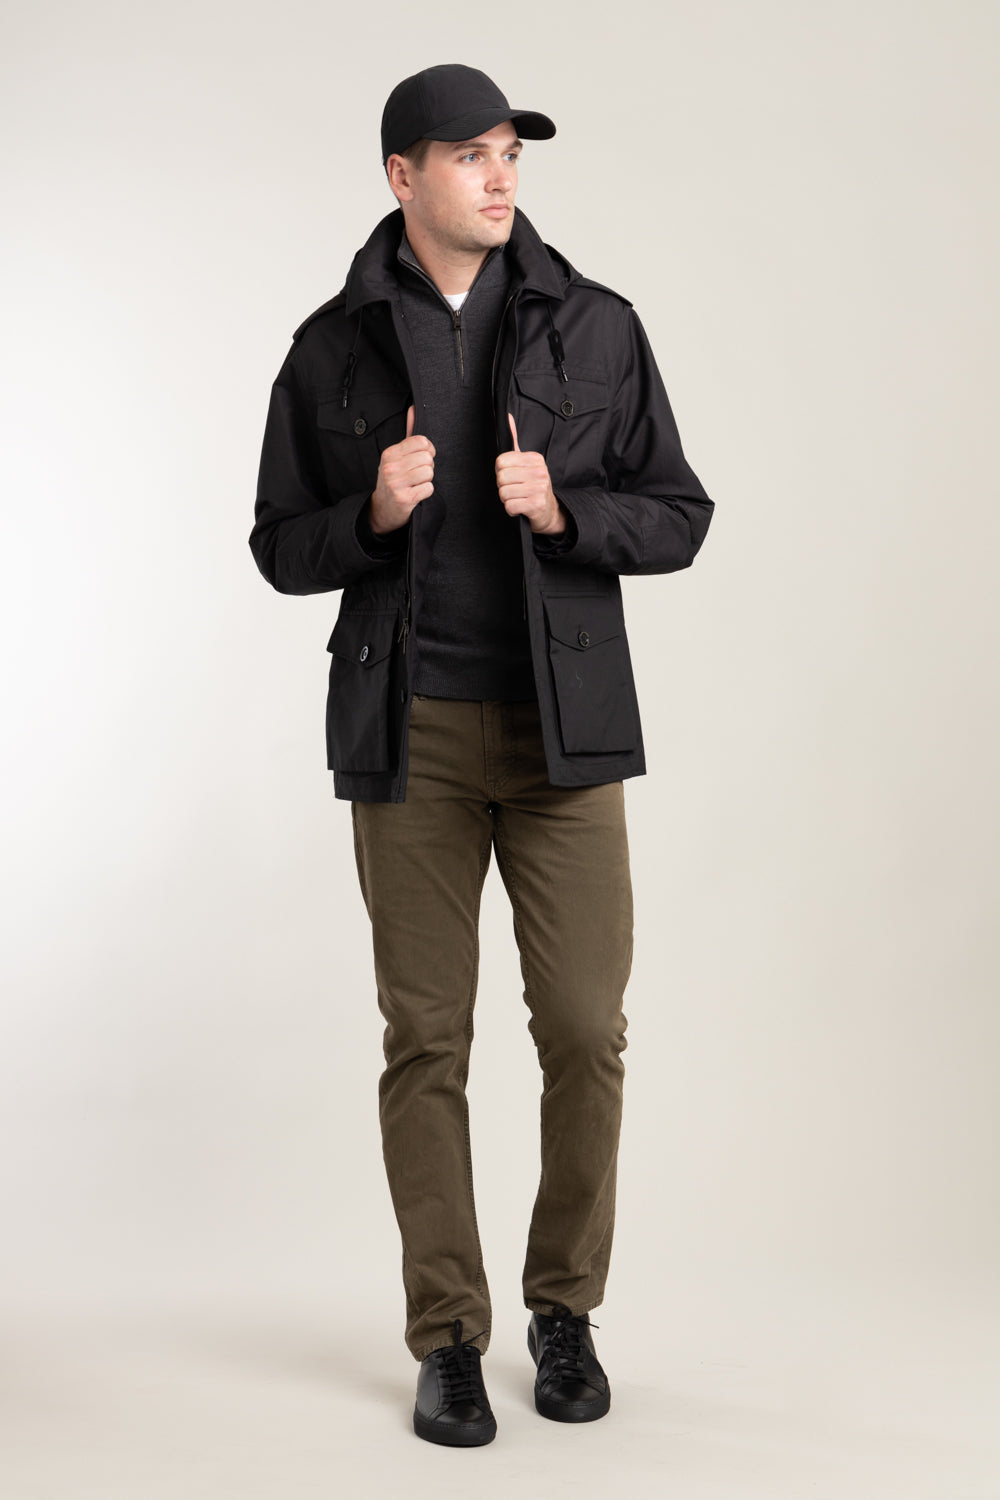 Field Jacket – The Helm Clothing